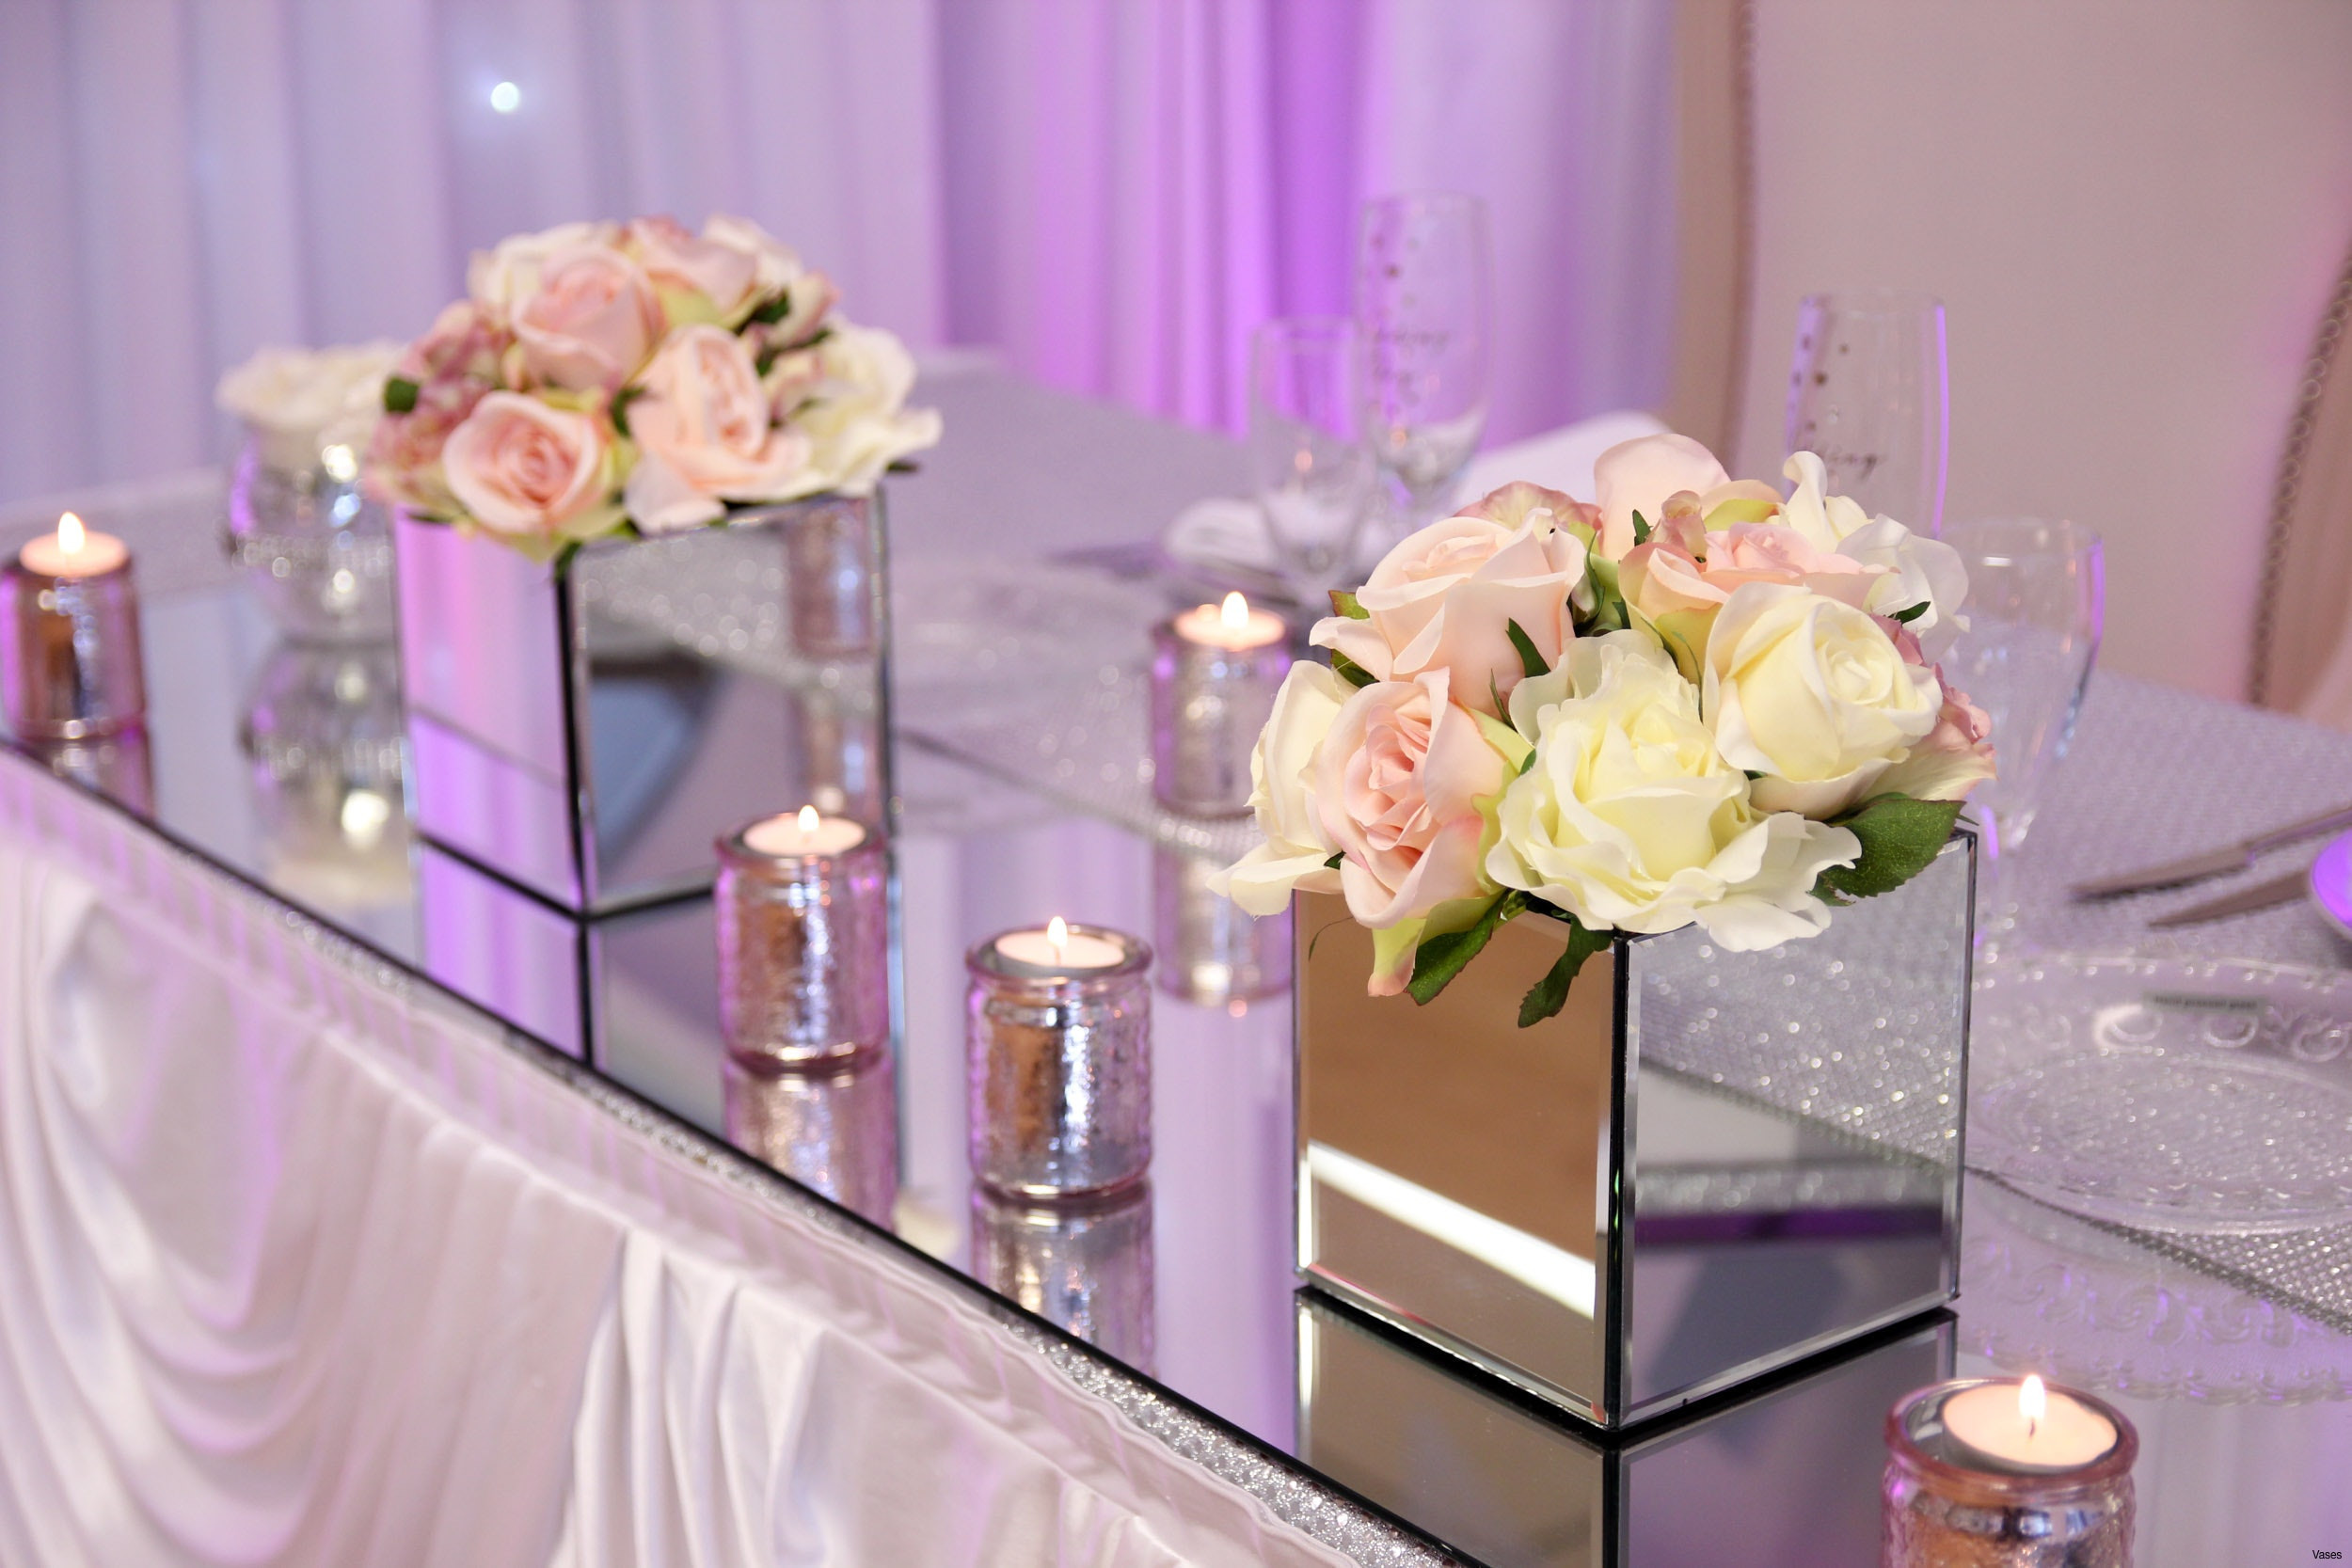 30 Stunning White Flowers In Clear Vase 2024 free download white flowers in clear vase of wedding party favors awesome mirrored square vase 3h vases mirror intended for wedding party favors awesome mirrored square vase 3h vases mirror table decorati